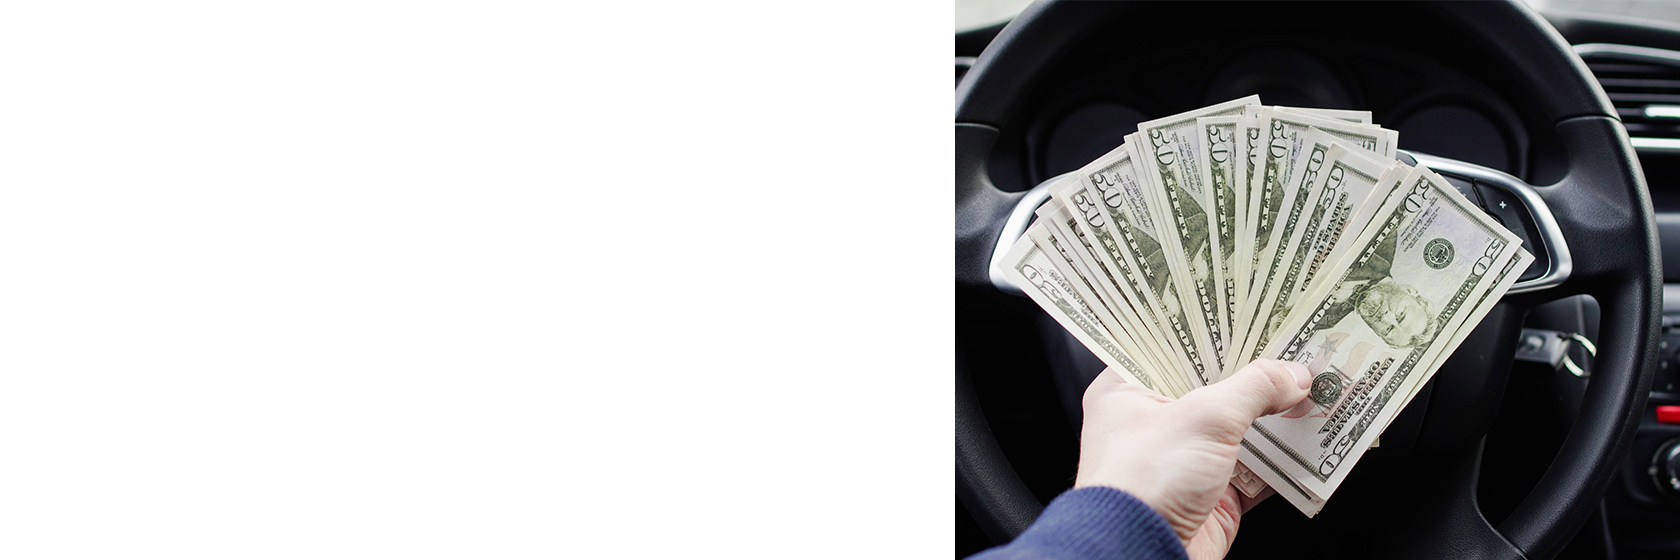 hand holding money in front of a car steering wheel